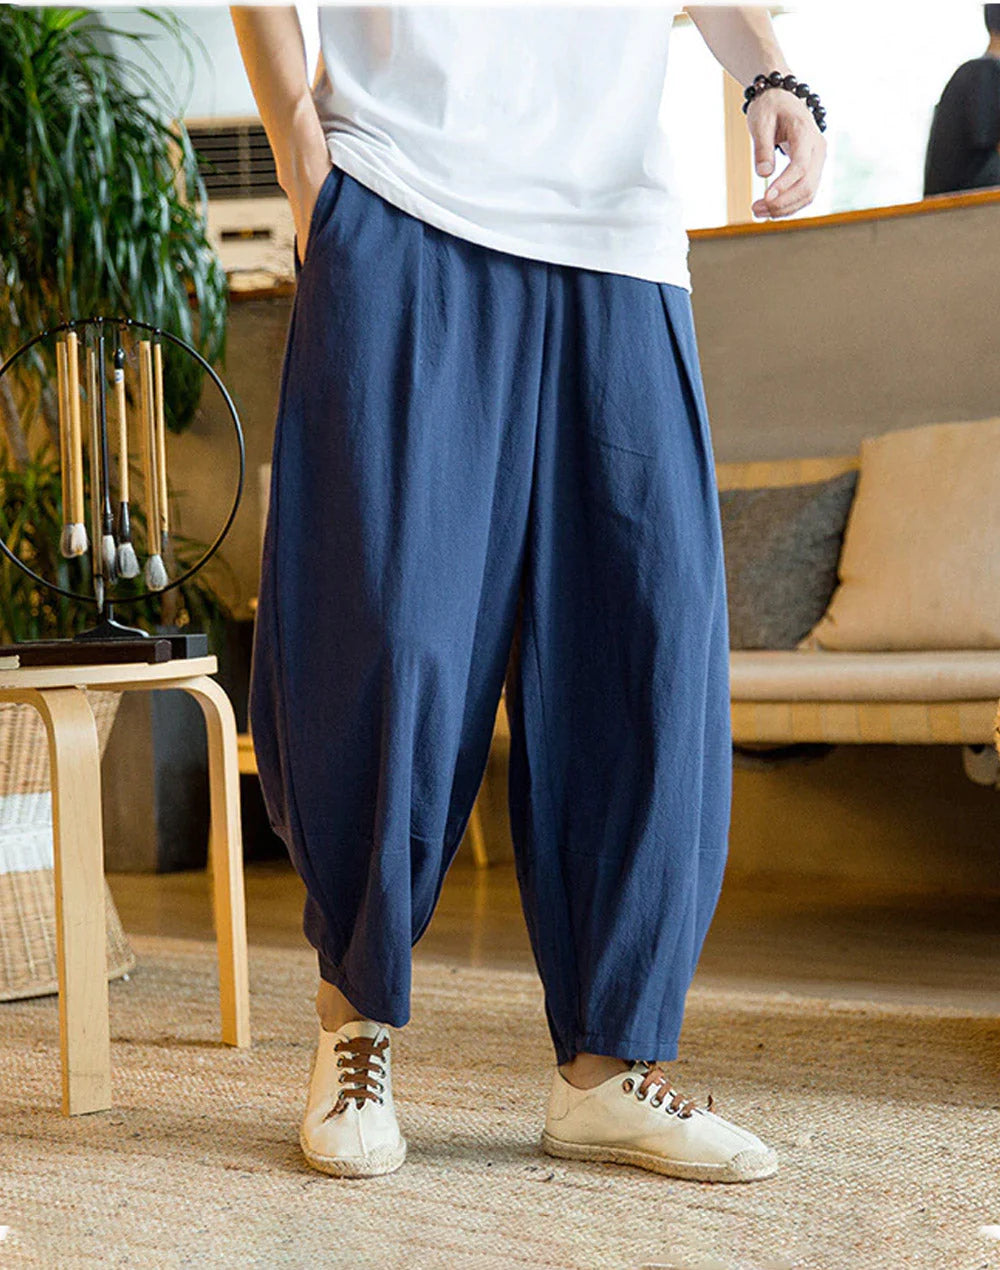 What are Harem pants and how to style them? | Business Upturn